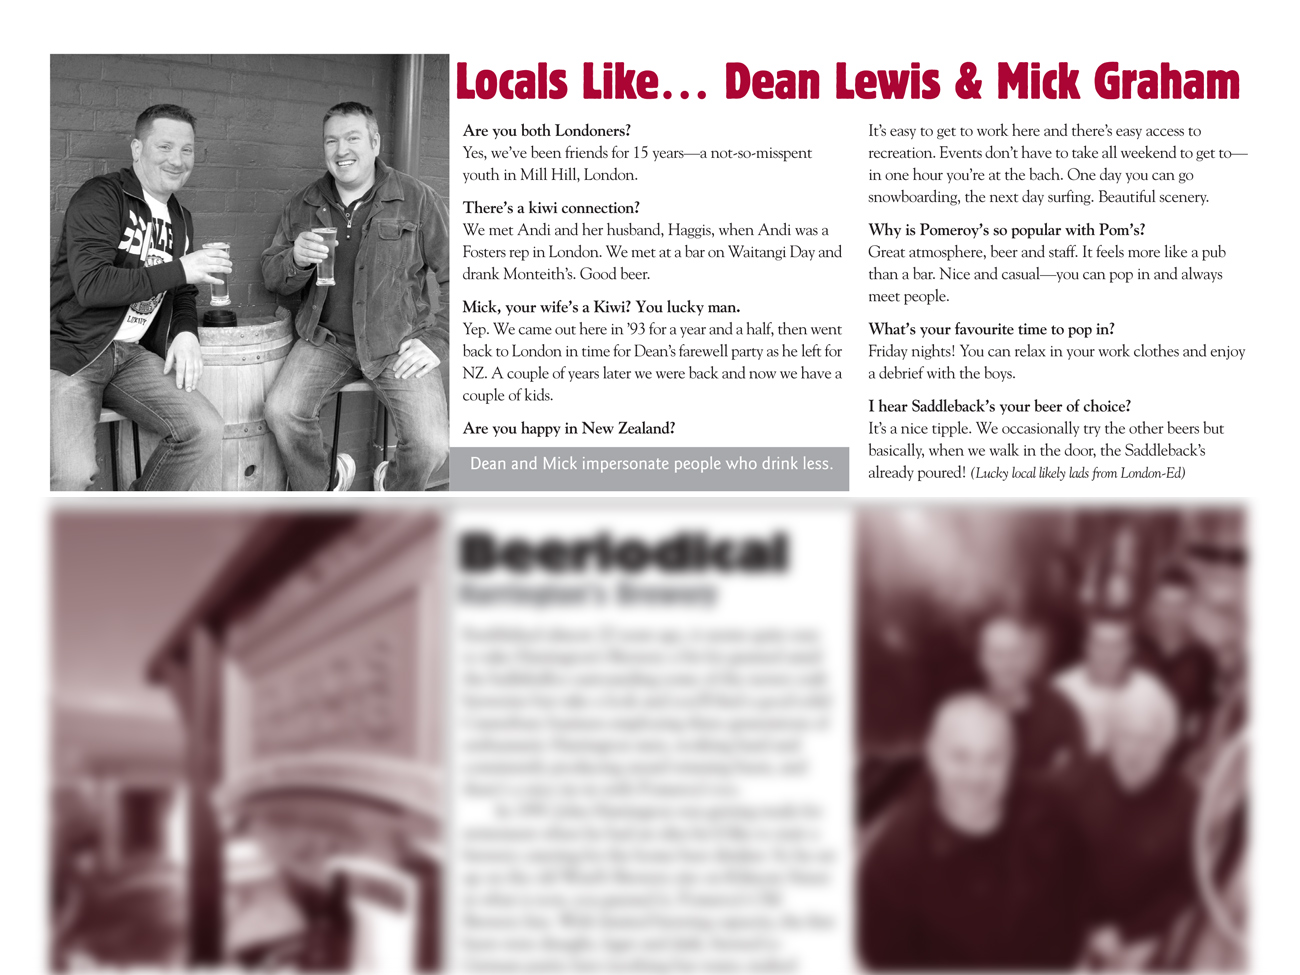 The Pomeroy’s Press. Pom’s “Locals like…” profile article. Dean Lewis and Mick Graham.